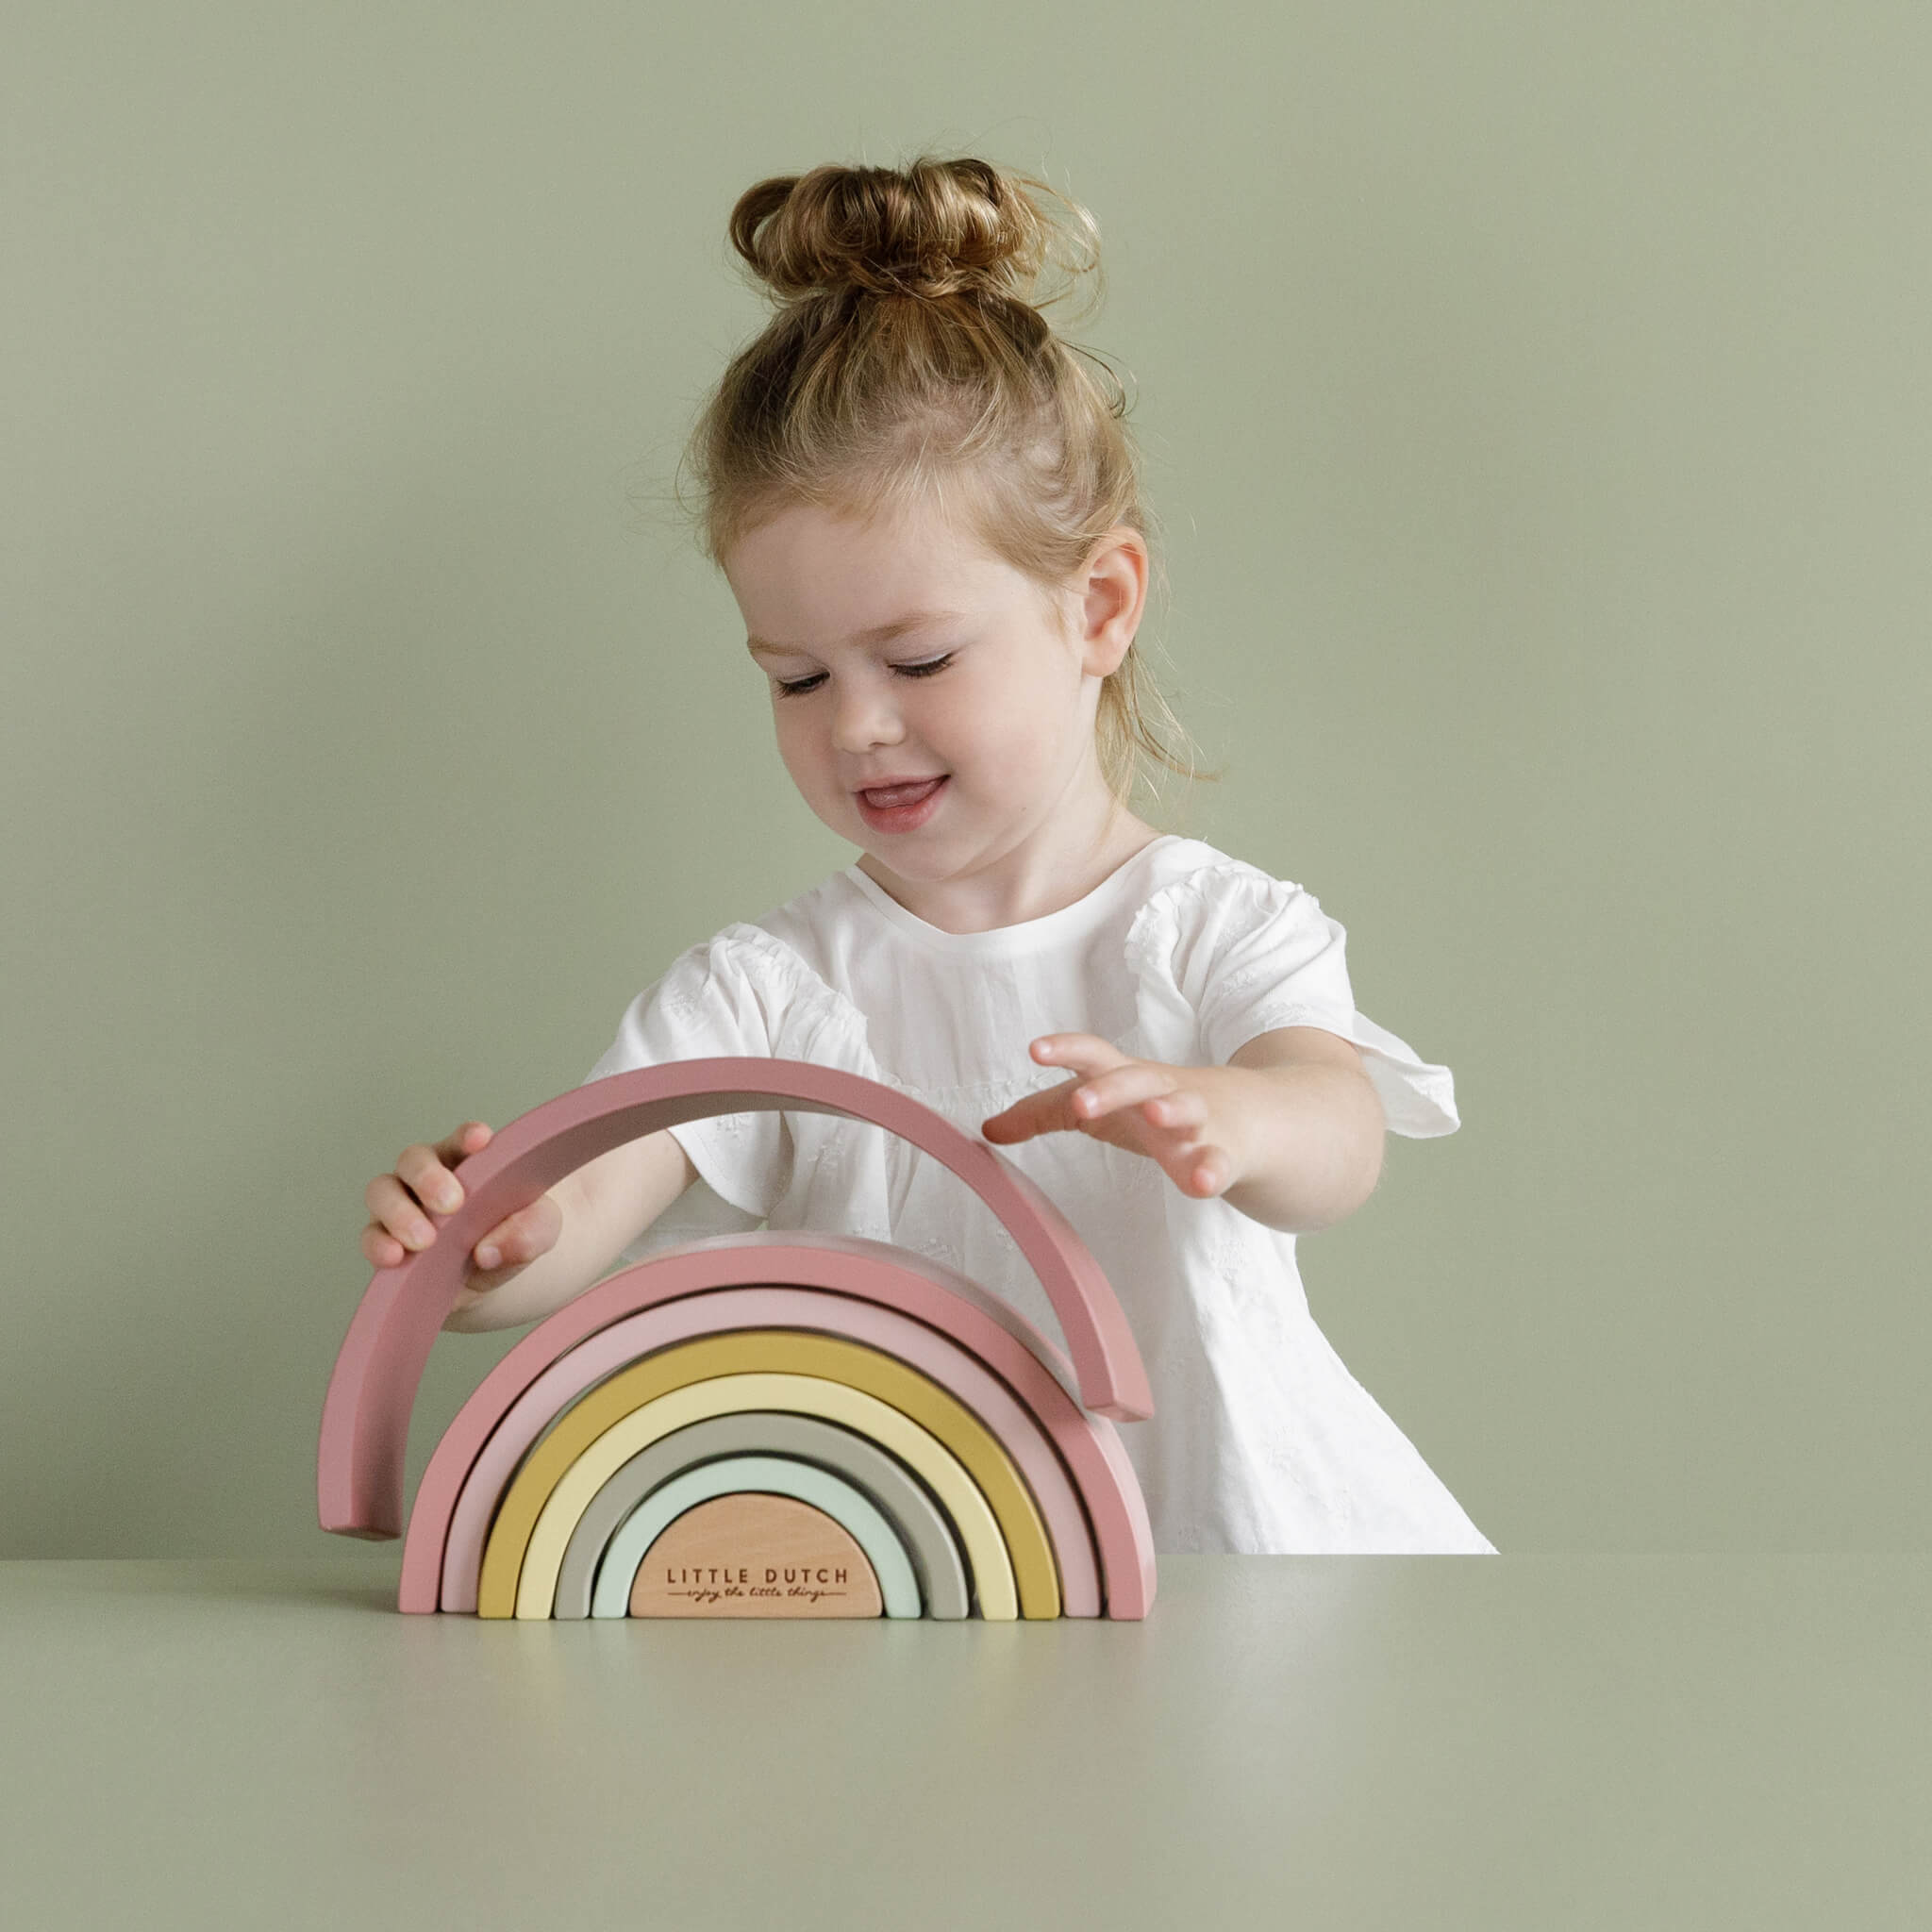 Girl Playing with Little Dutch Wooden Rainbow Stacker in Pink. Stacking Toy